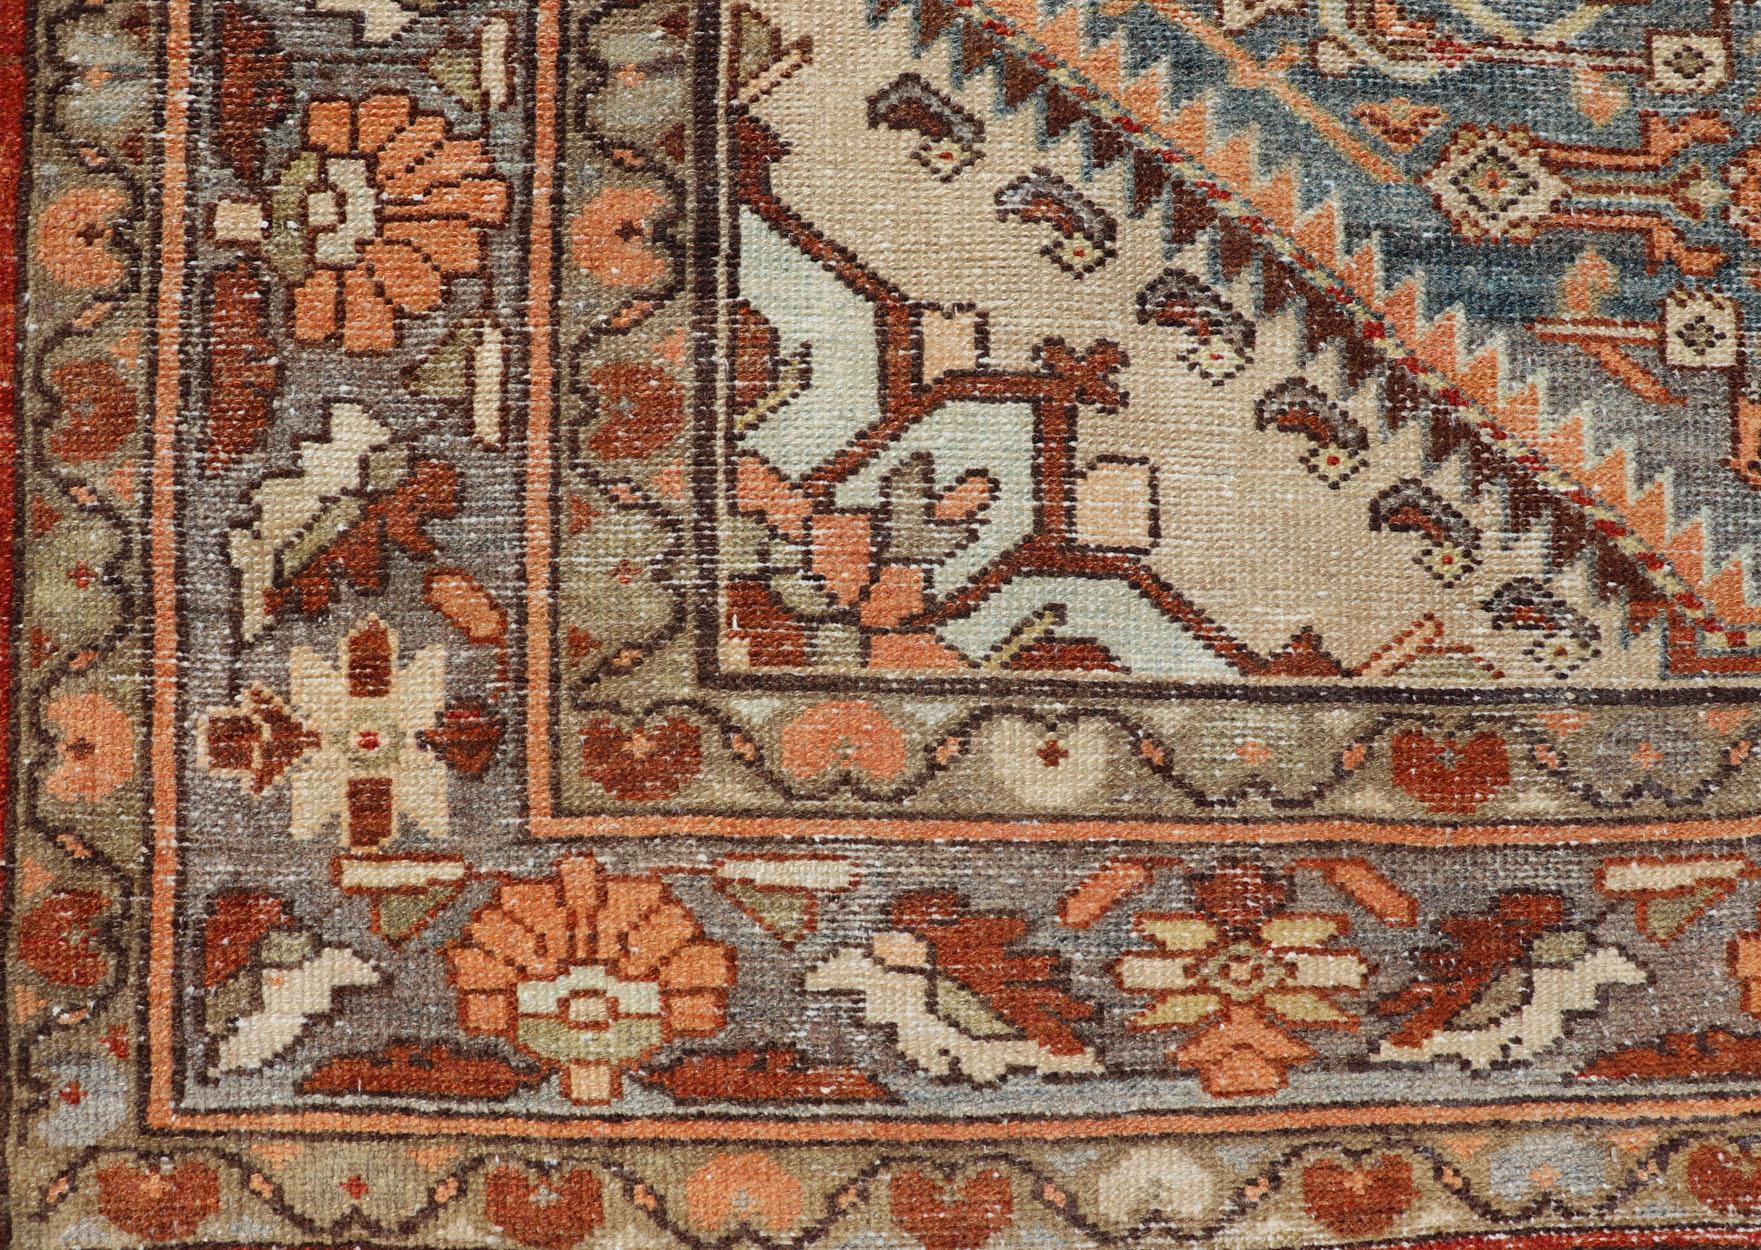 Antique Persian Hamadan Rug with Central Medallion & Sub-Geometric Floral Design For Sale 1